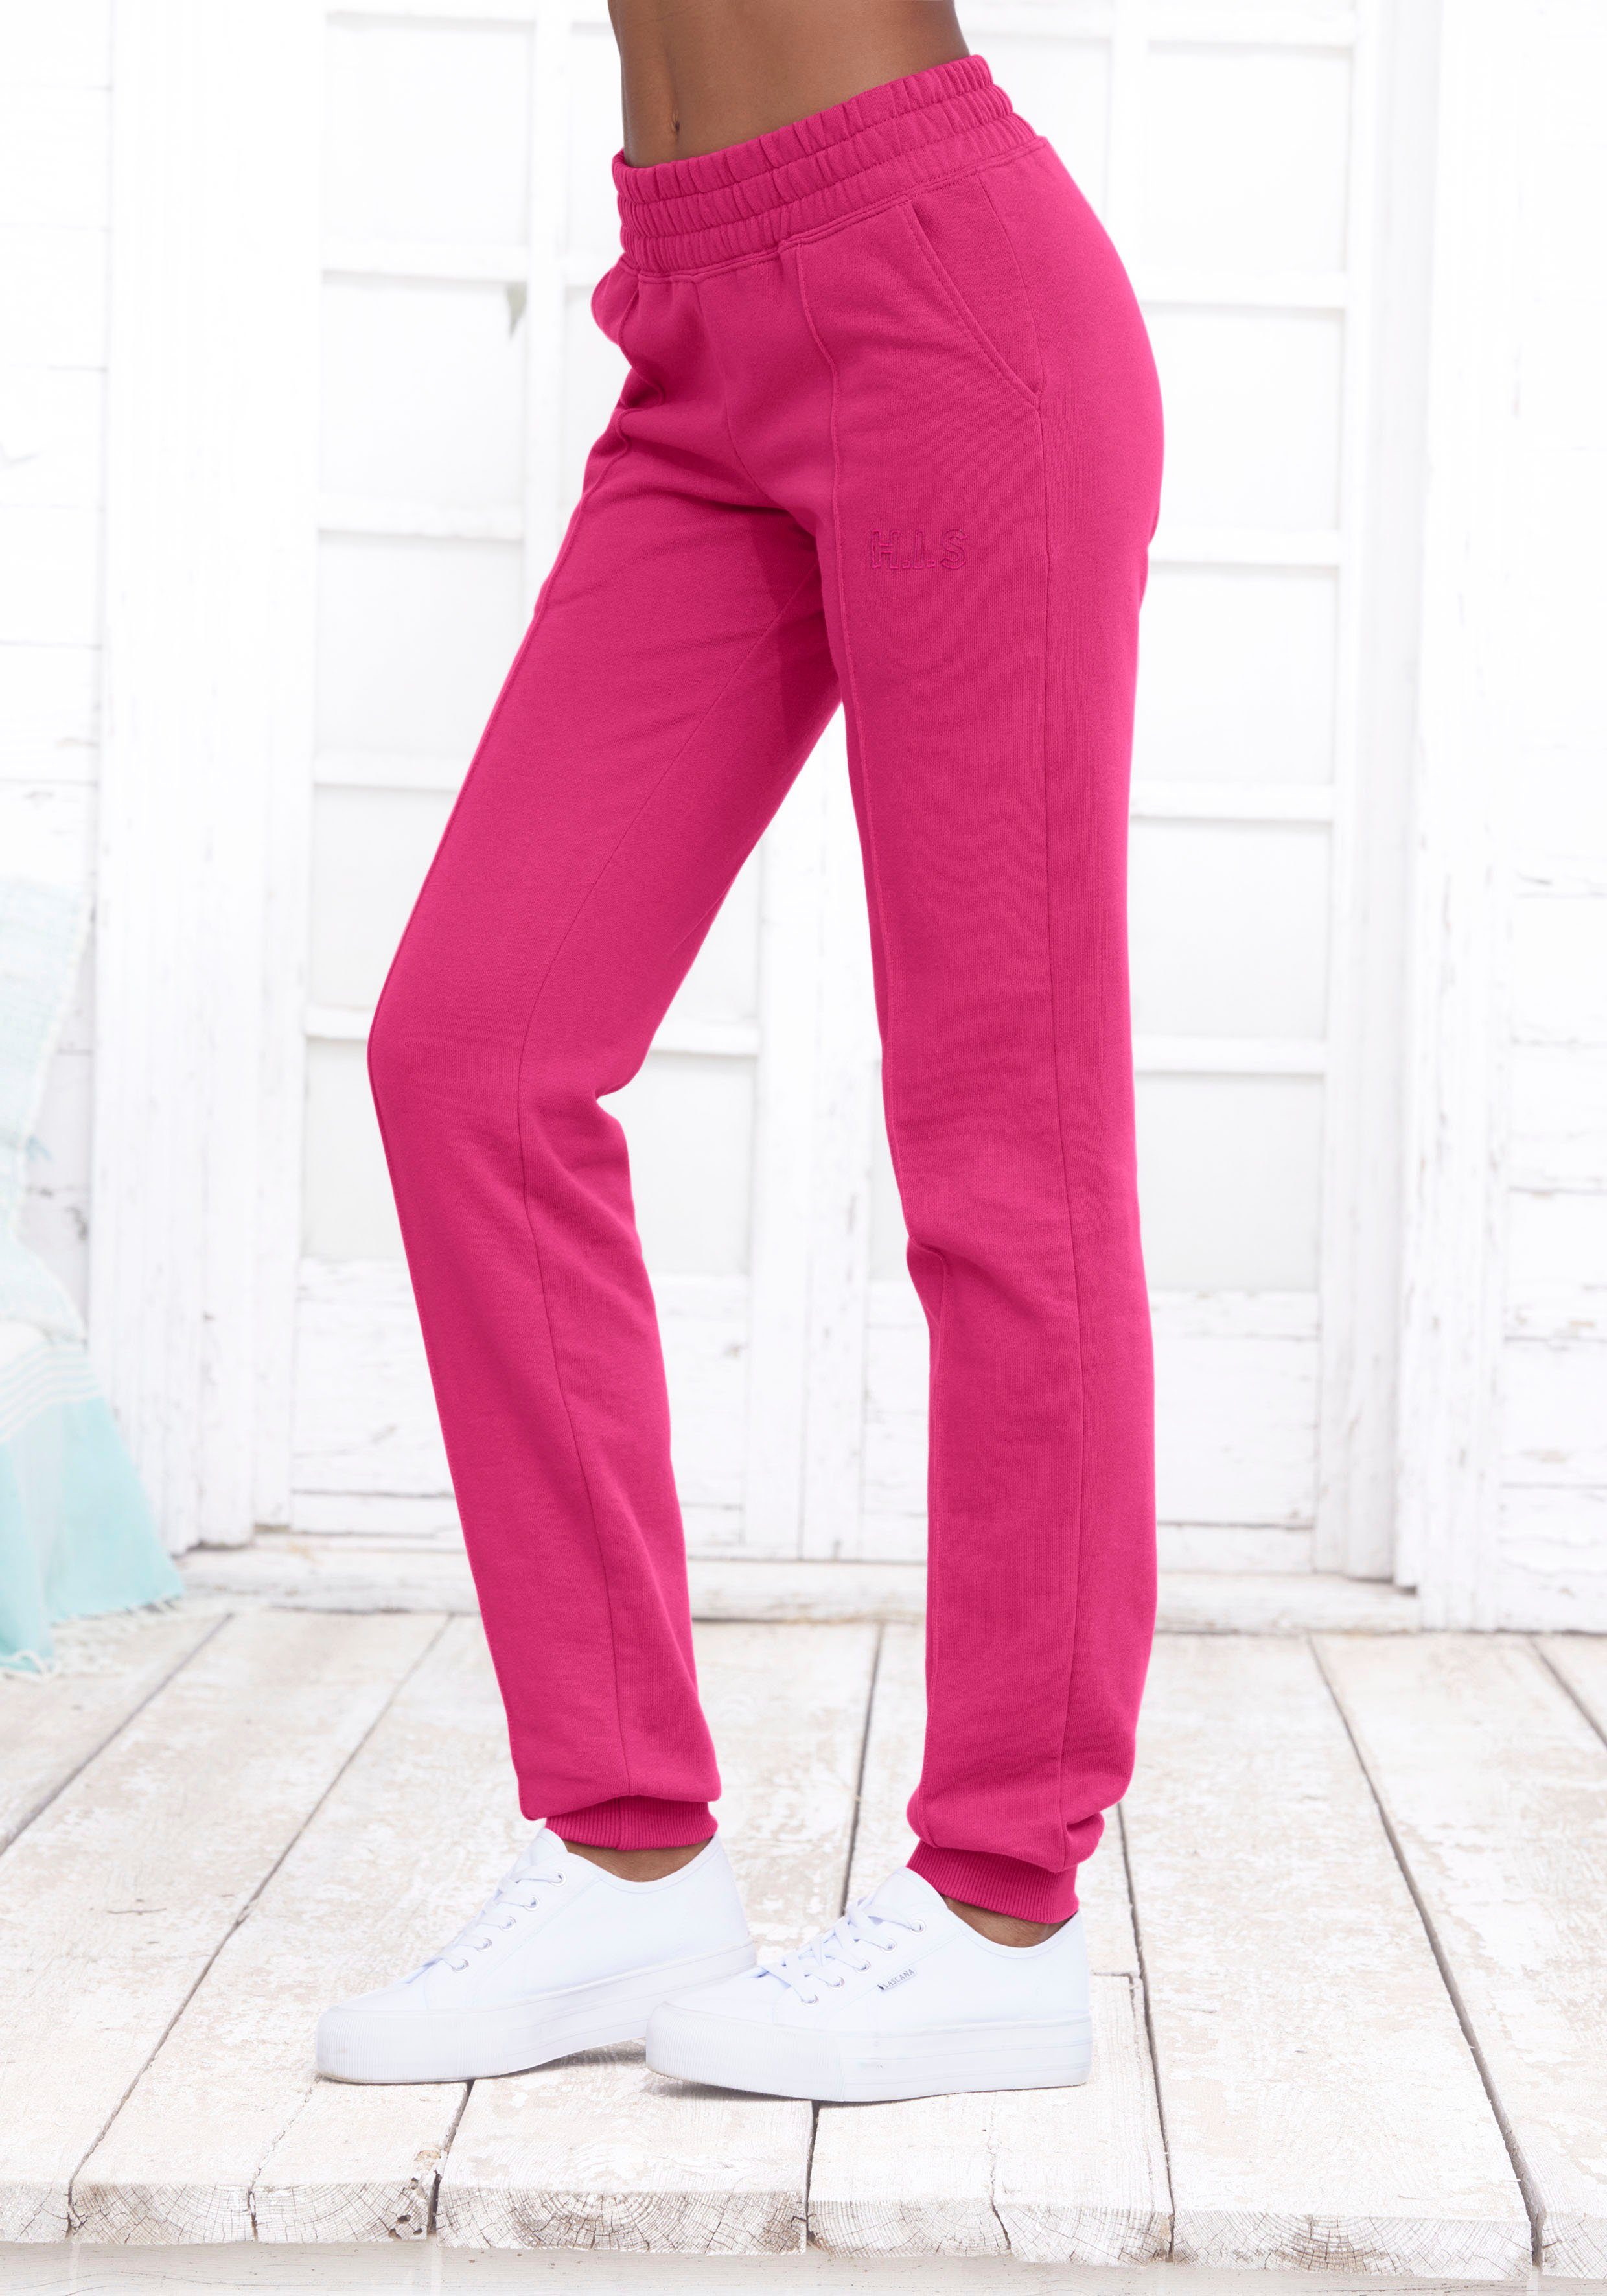 Relaxhose Piping H.I.S pink mit Loungeanzug vorn,